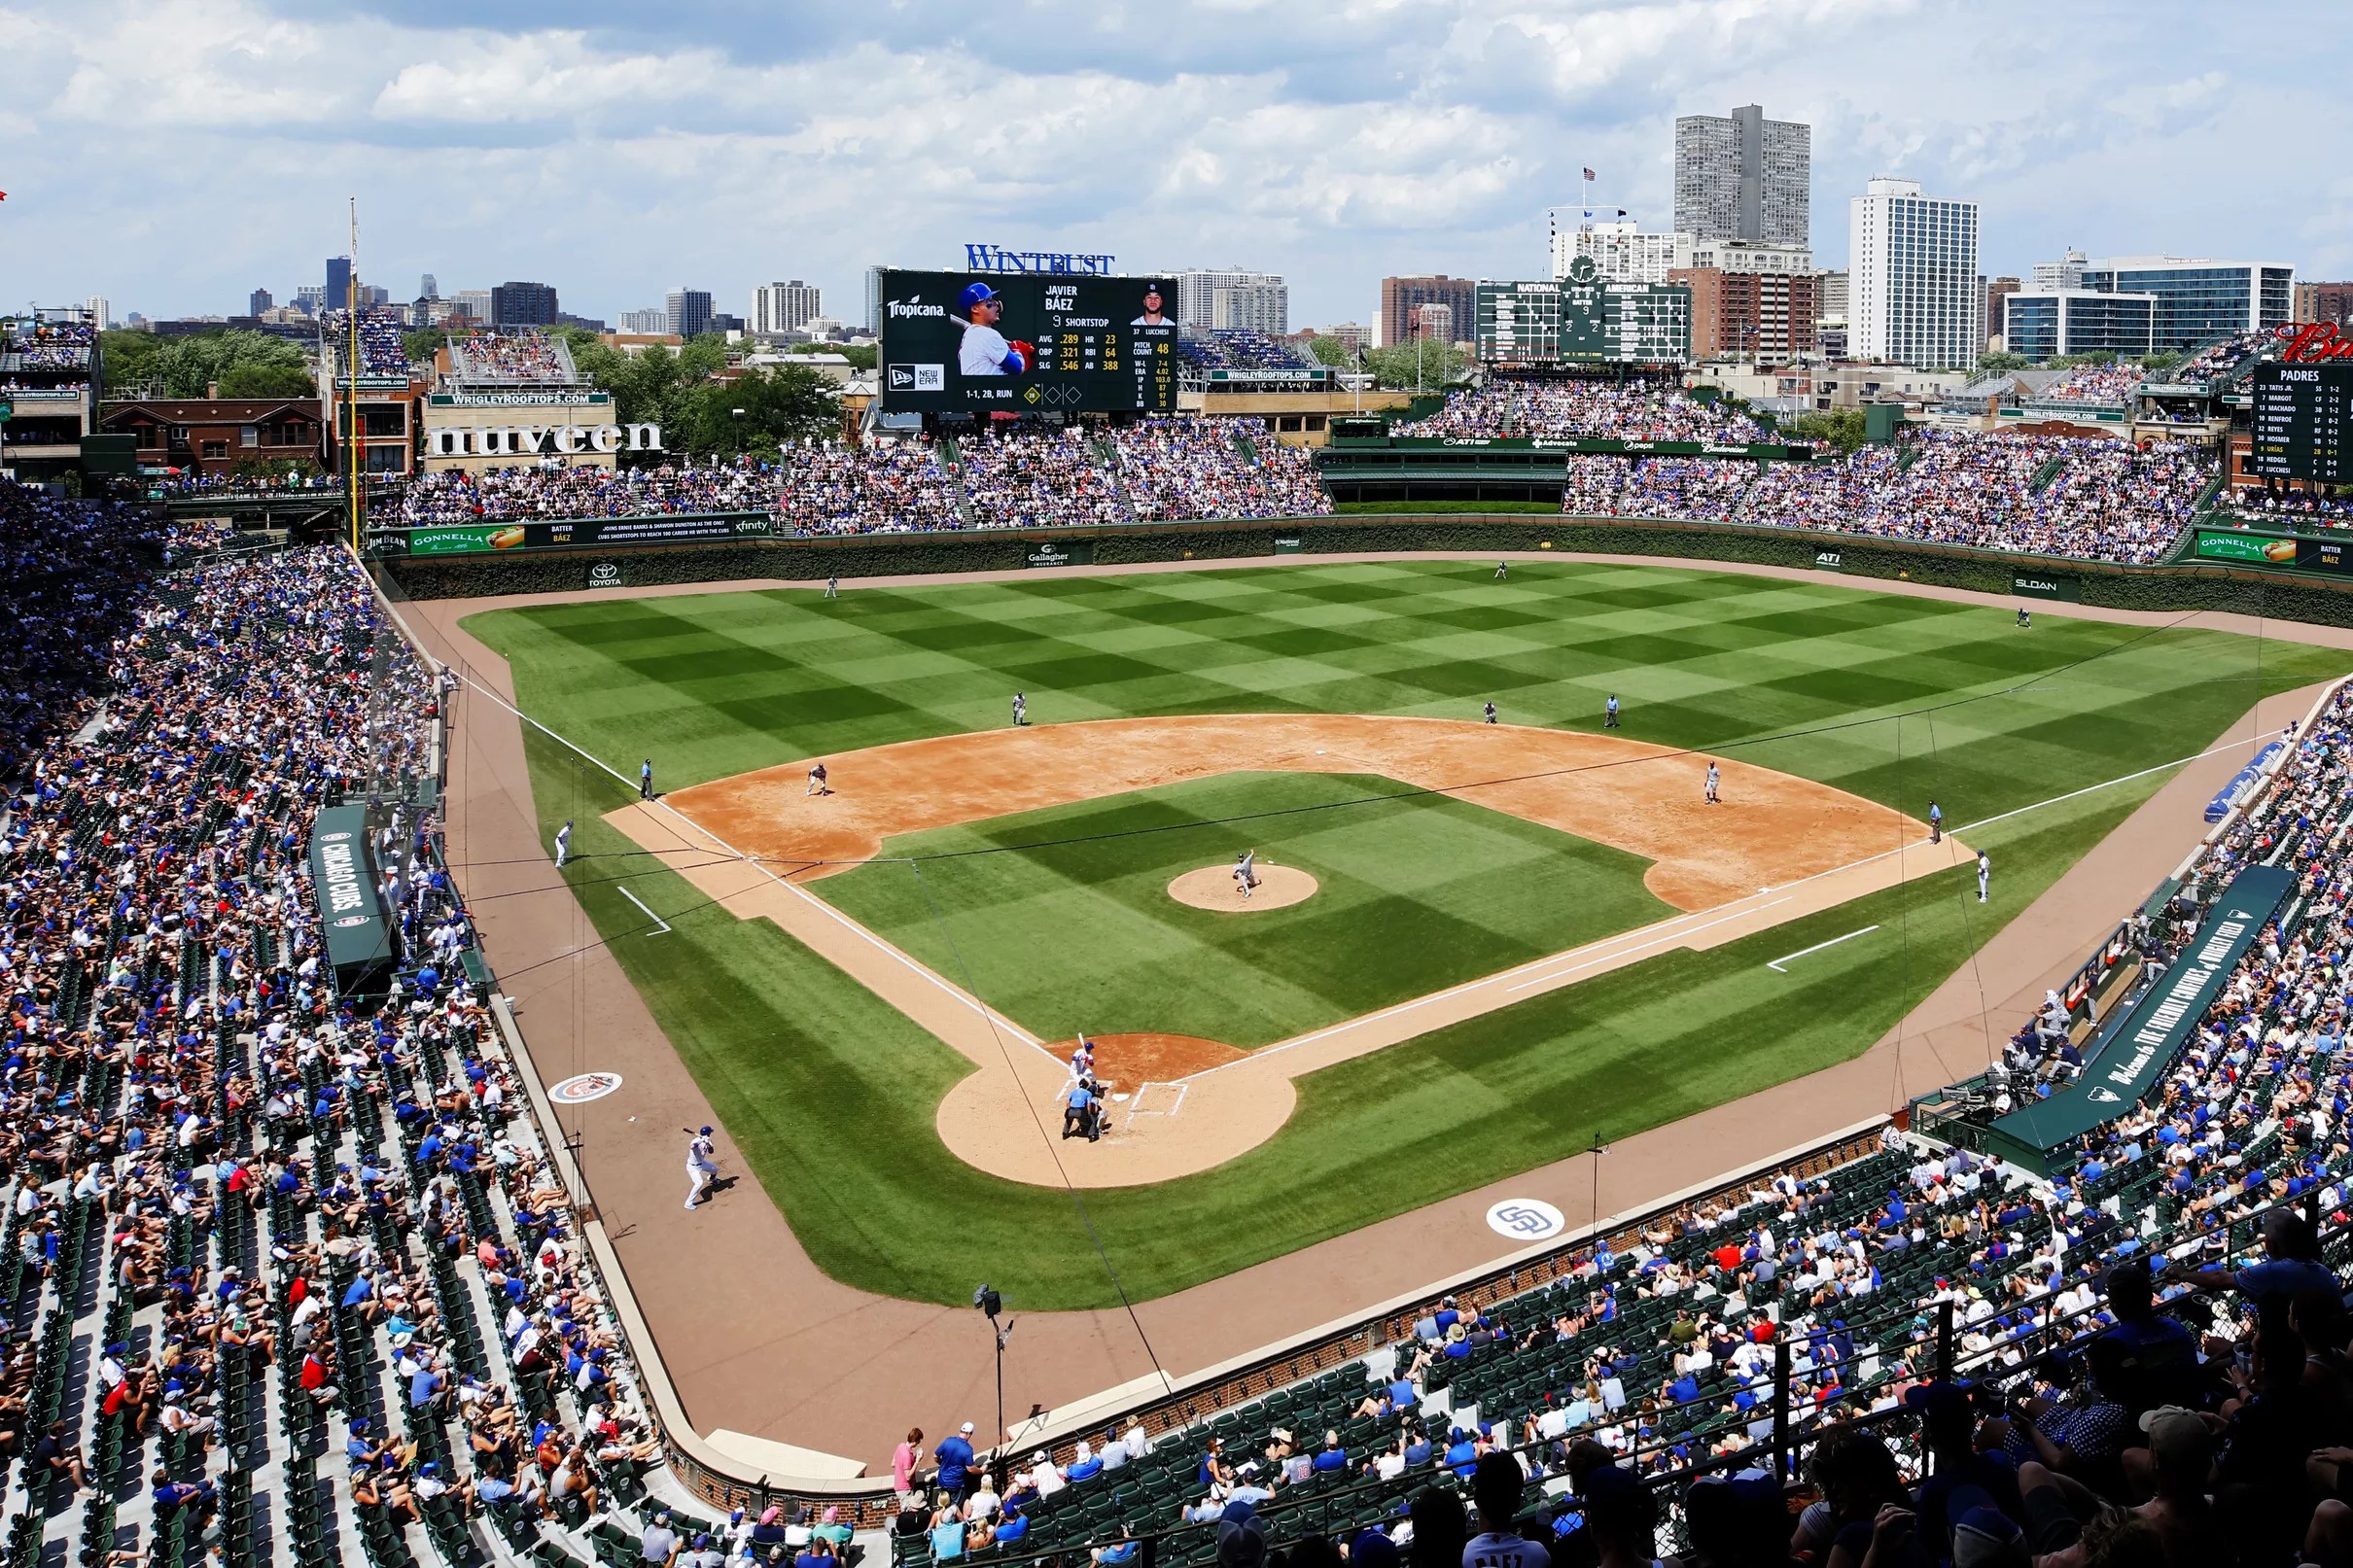 Cubs, White Sox will receive permission for fans in April, per report